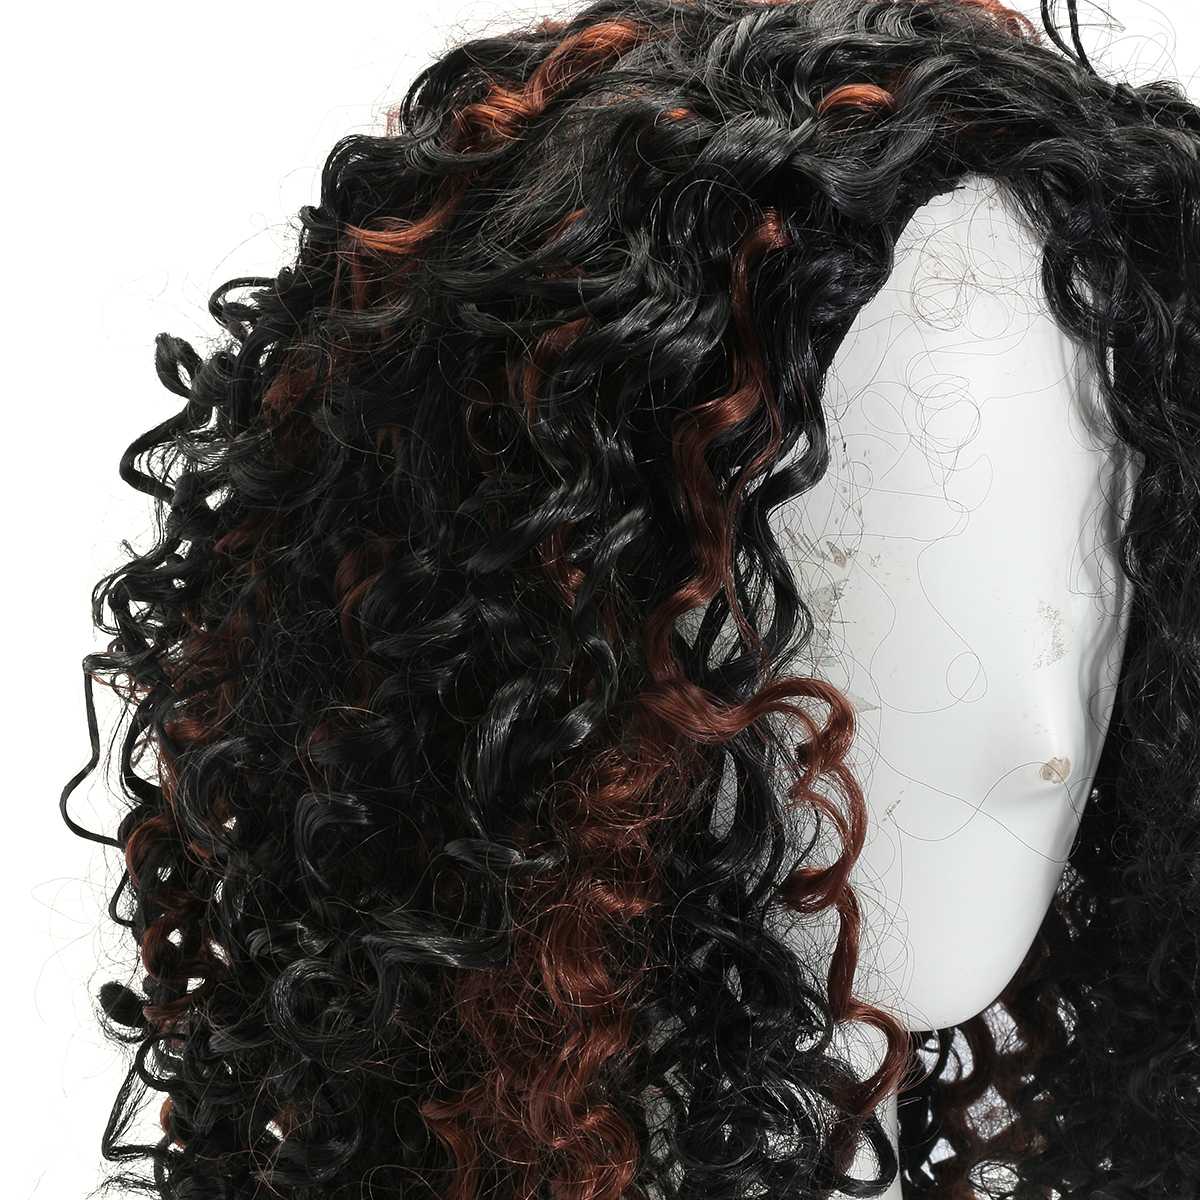 Brazilian-Black-Brown-Hair-Deep-Wavy-Curly-Lace-Front-Full-Wig-1230999-5